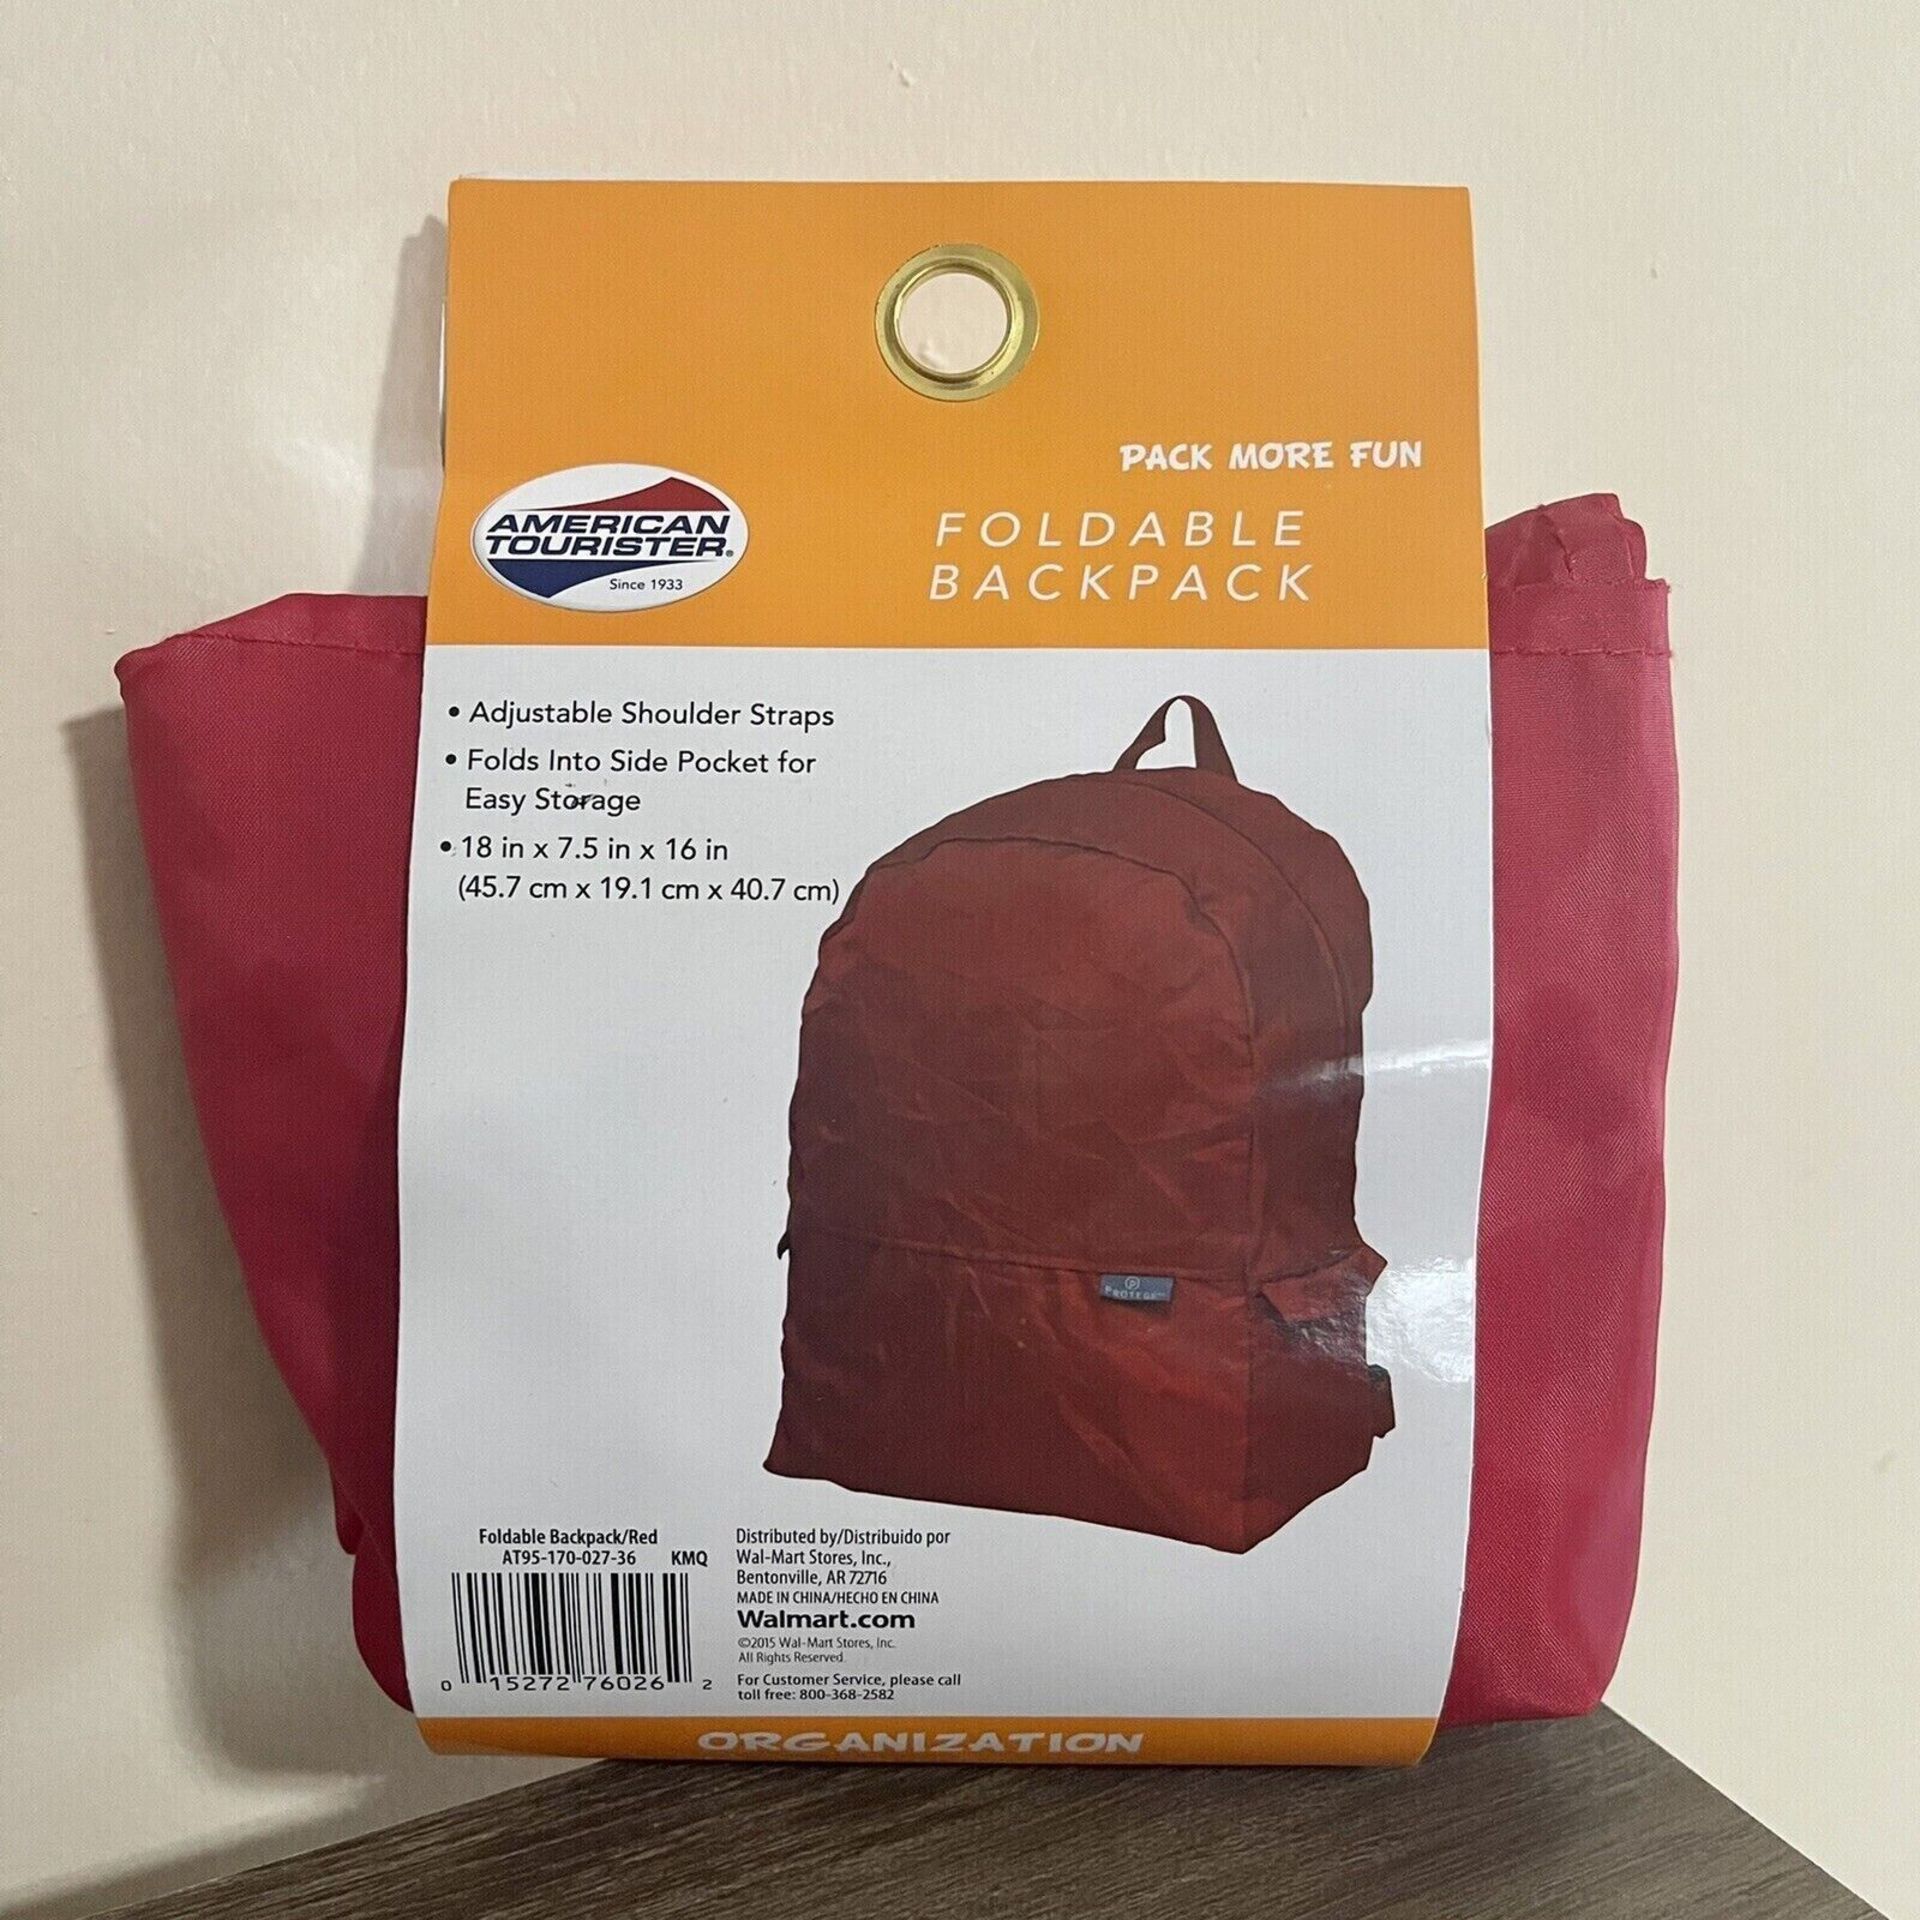 JOBLOT 200 X NEW BACKPACKS - MIX OF RED AND GREY - 45.7 X 40.7CM -